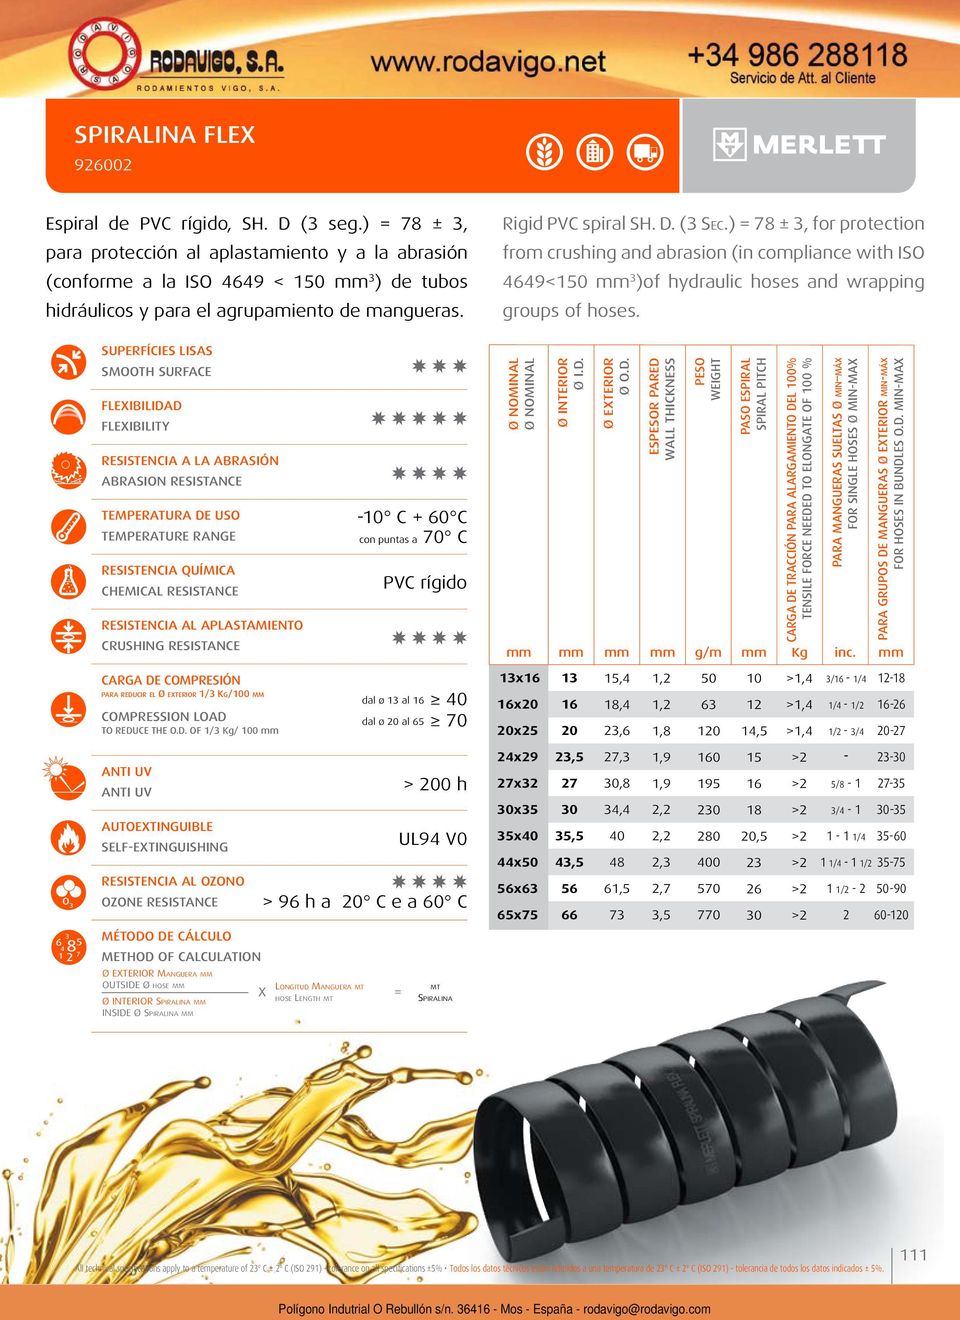 ) 78 ±, for protection from crushing and abrasion (in compliance with ISO 449<0 mm )of hydraulic hoses and wrapping -10 C + 0 C con puntas a 70 C PVC rígido ESR PARED PARA GRUPOS DE MANGUERAS min-máx